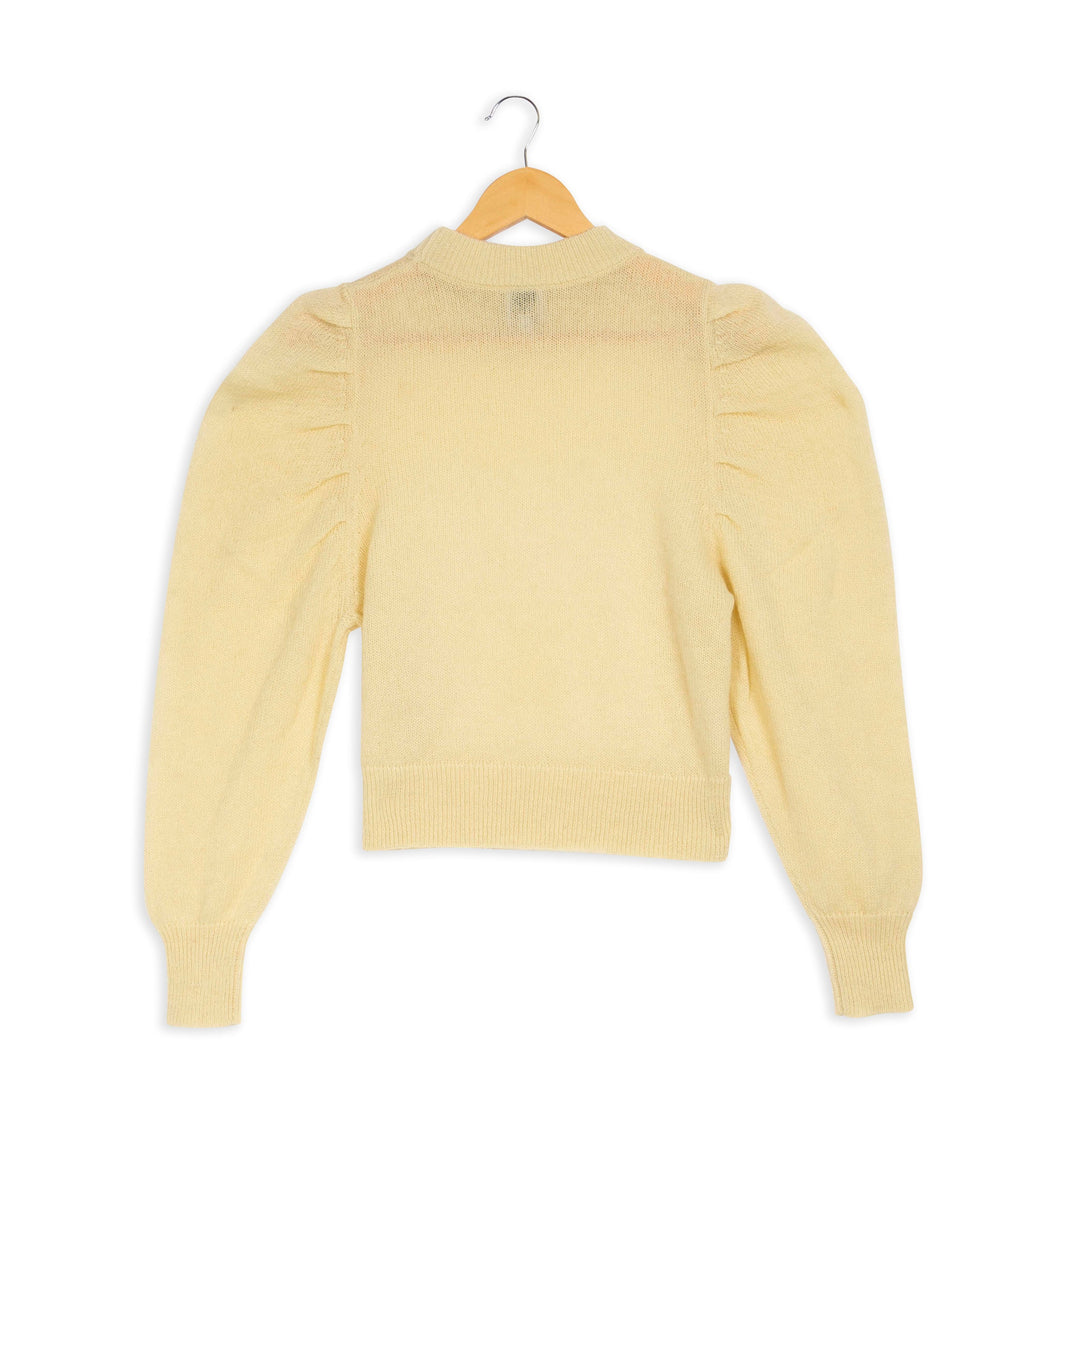 Mikael sweater - S